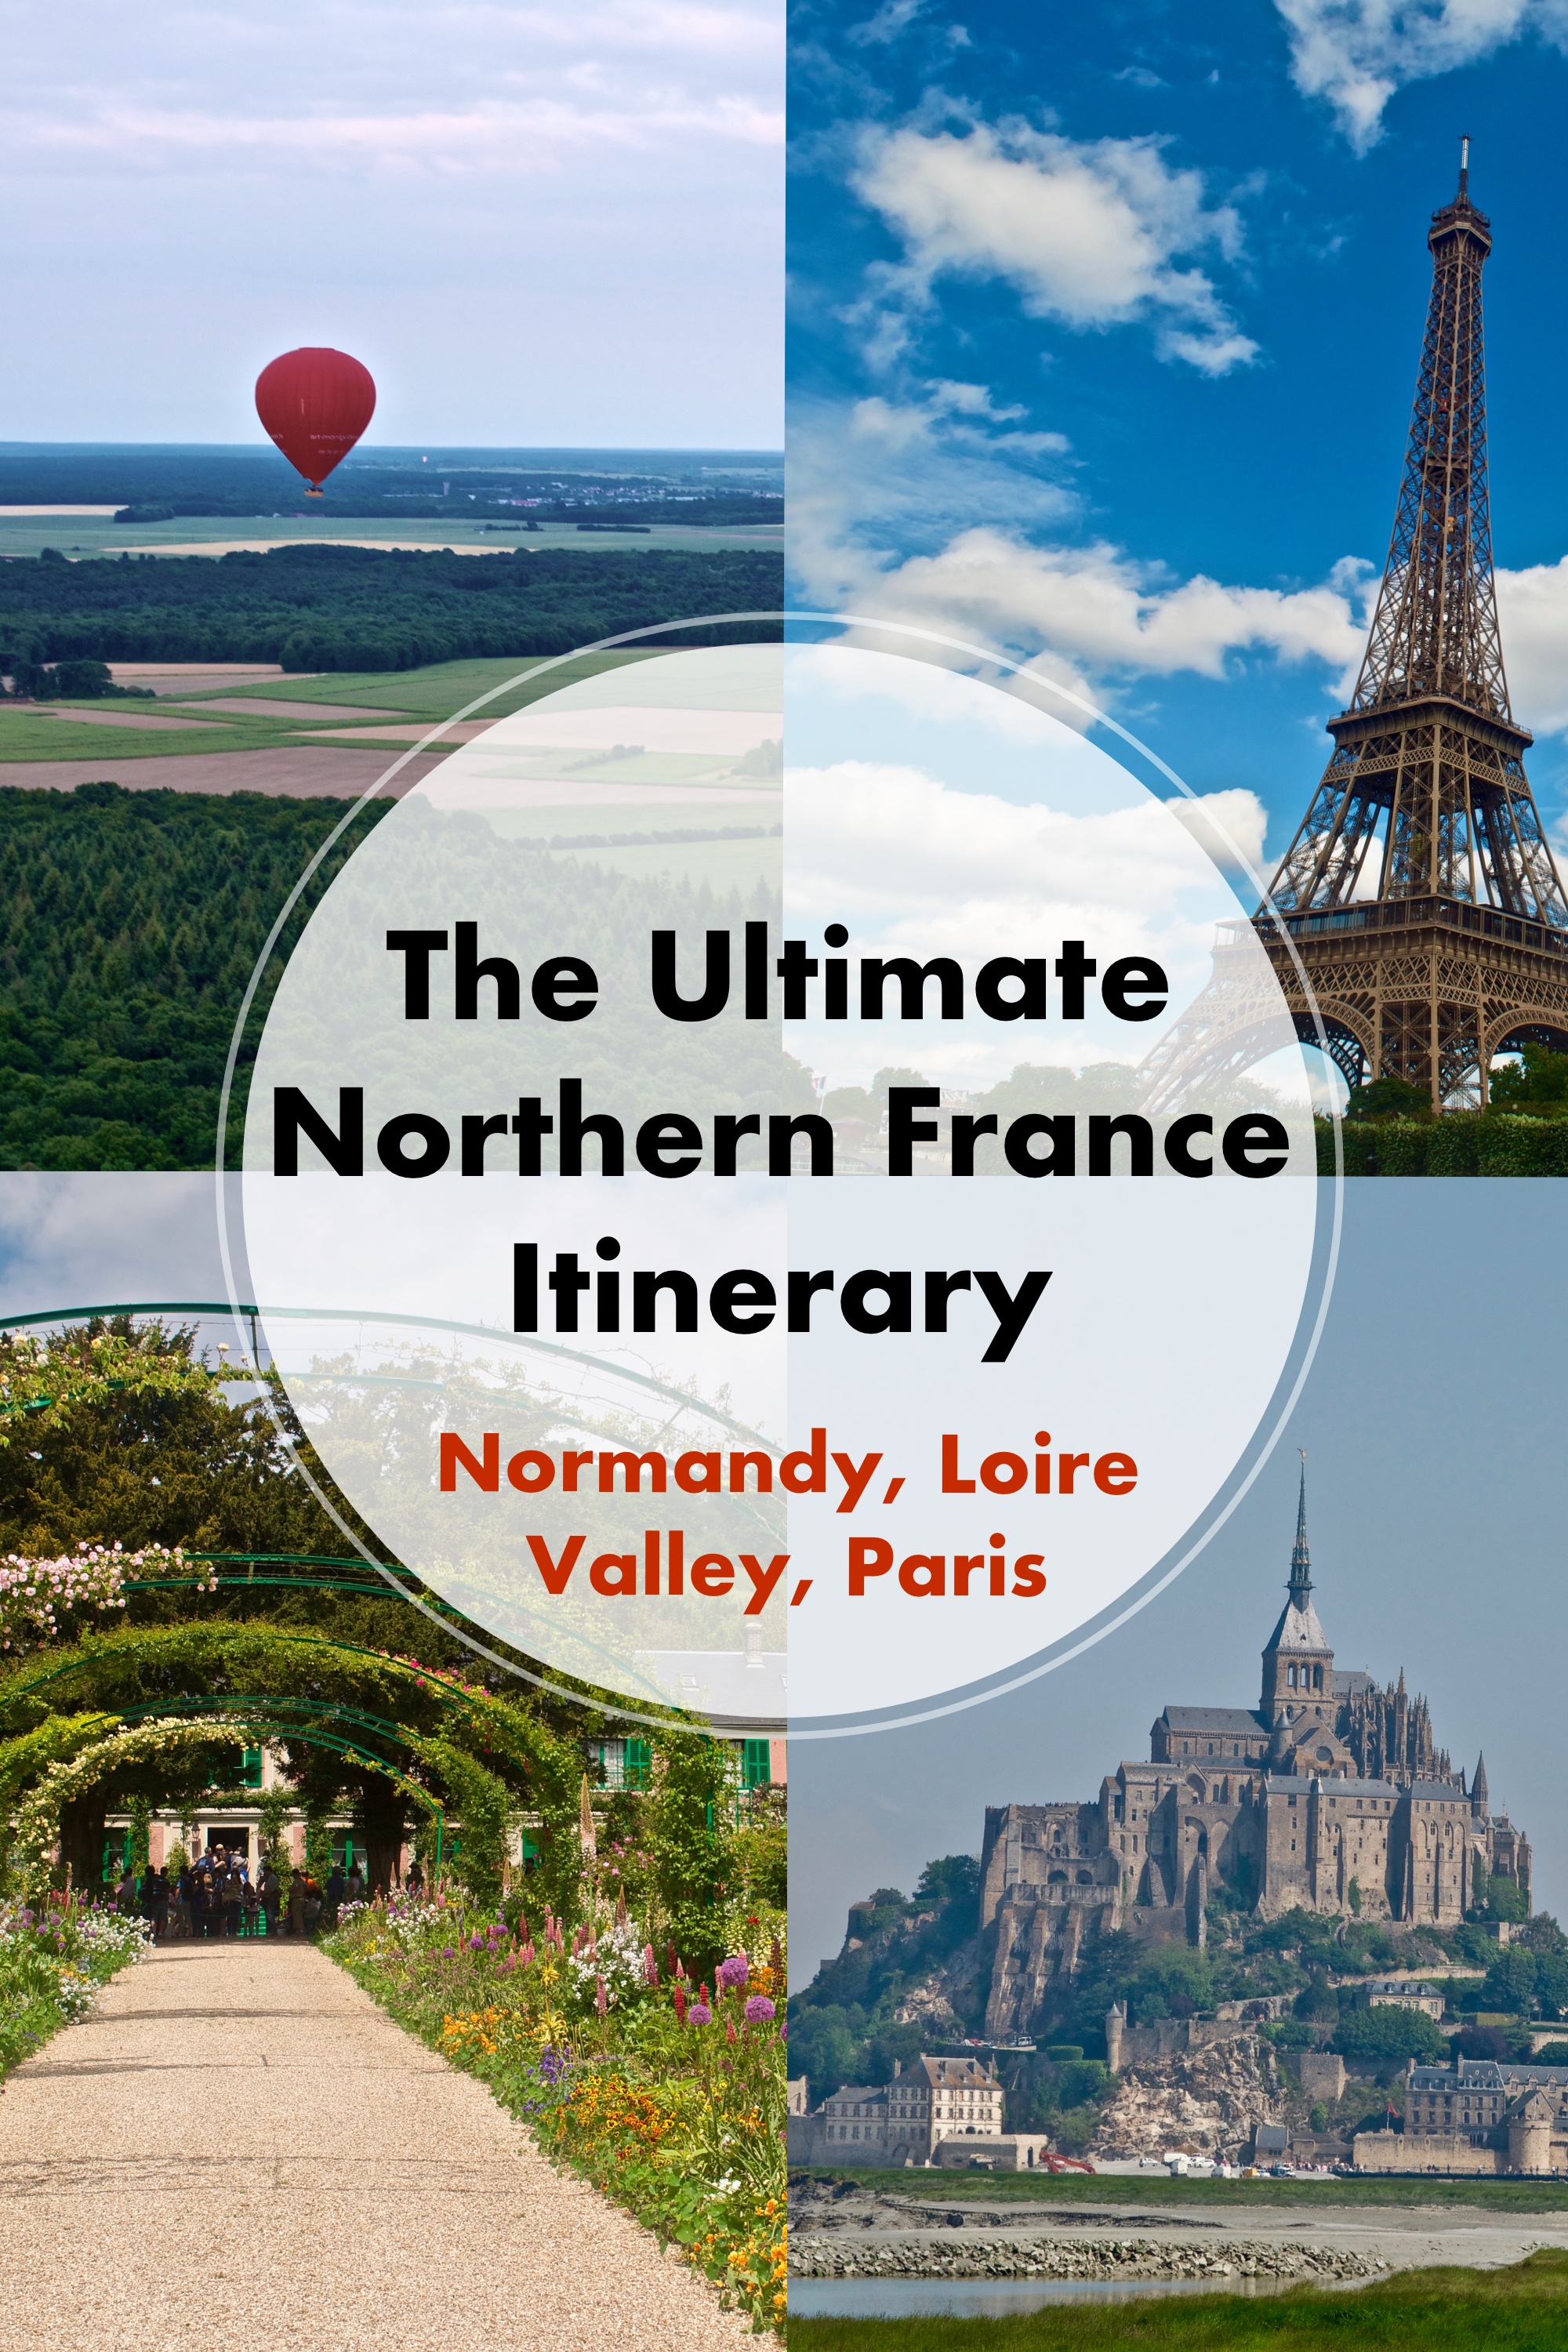 The Ultimate Northern France Itinerary: Normandy, Loire Valley, Paris - A Happy Passport #france #loirevalley #Paris #normandy #travel #europe